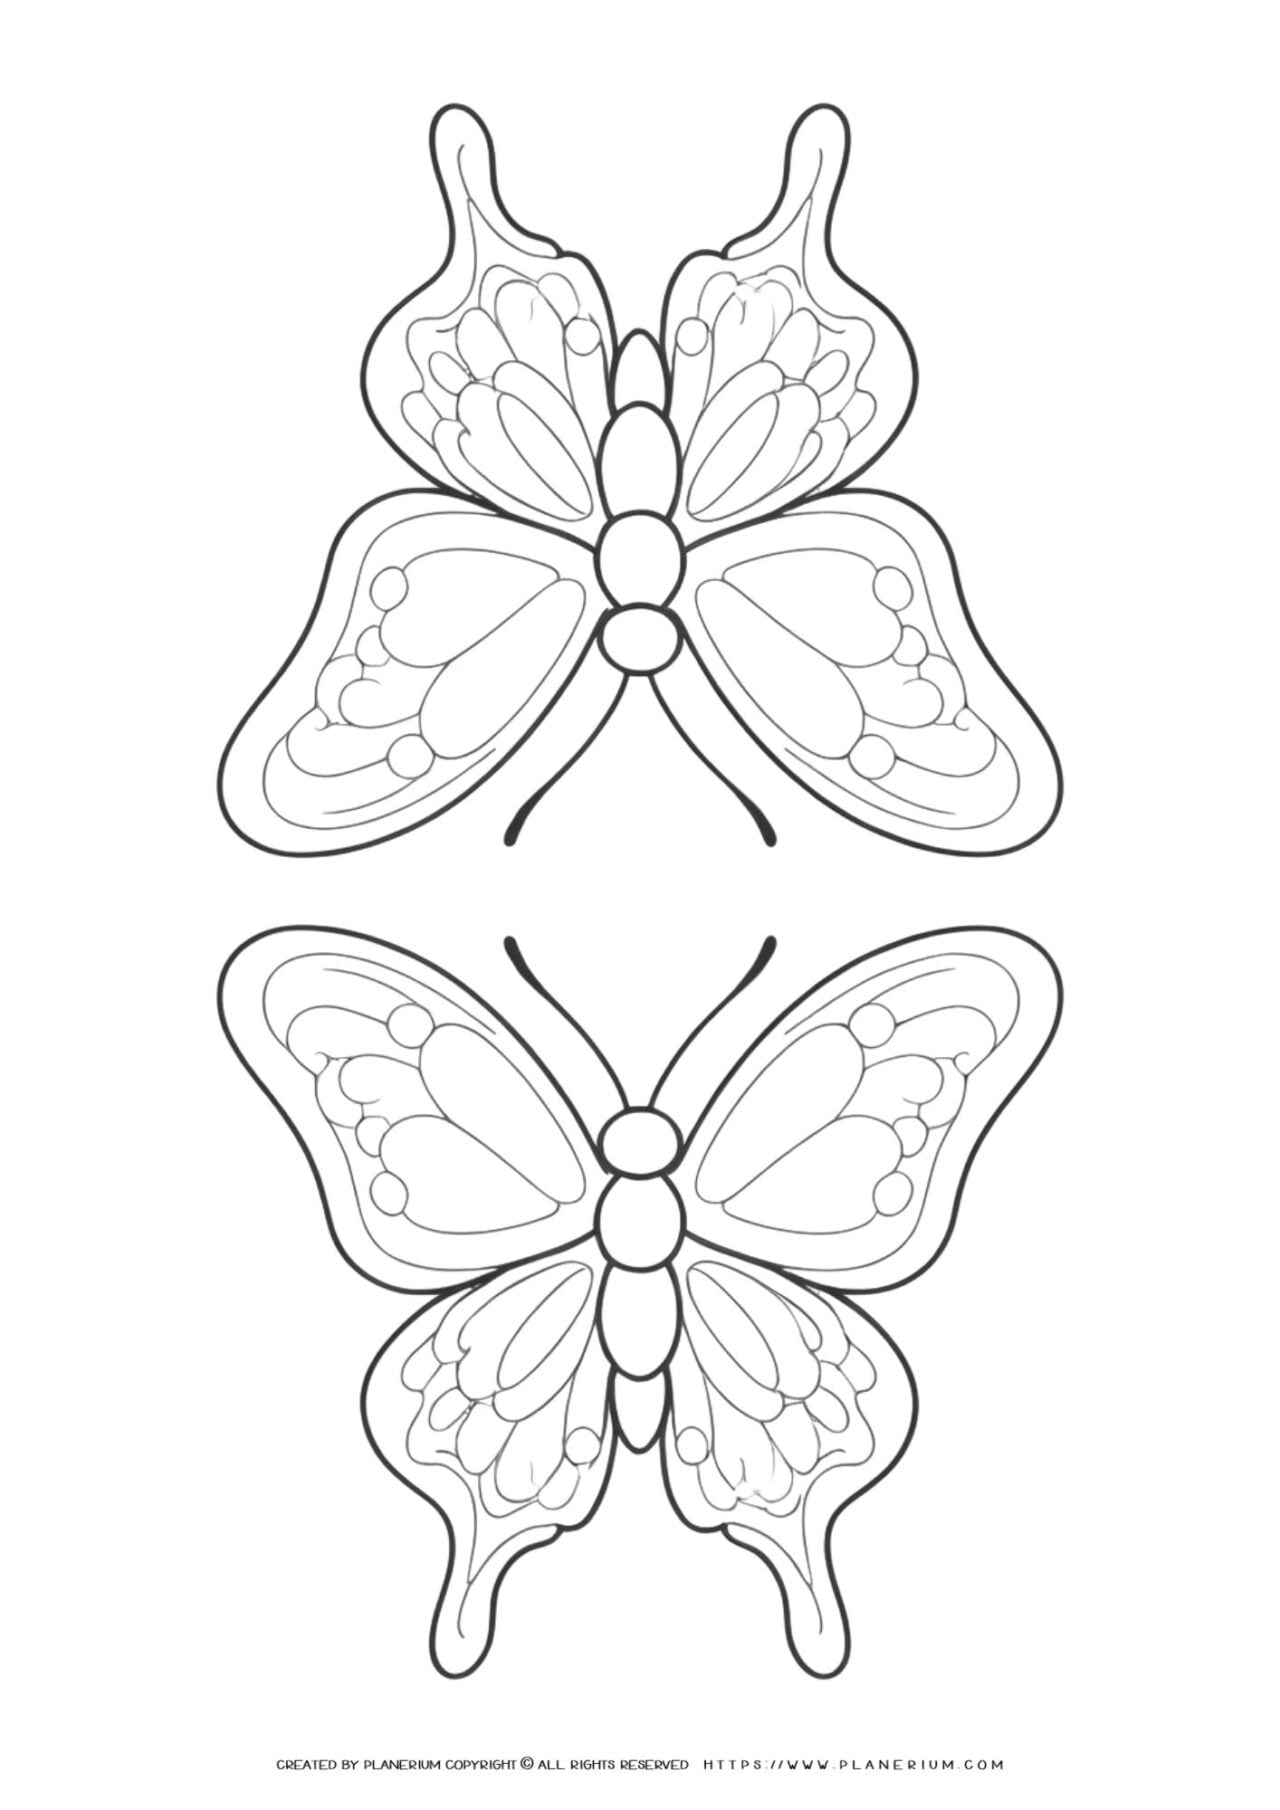 Butterfly coloring pages for children's activities.